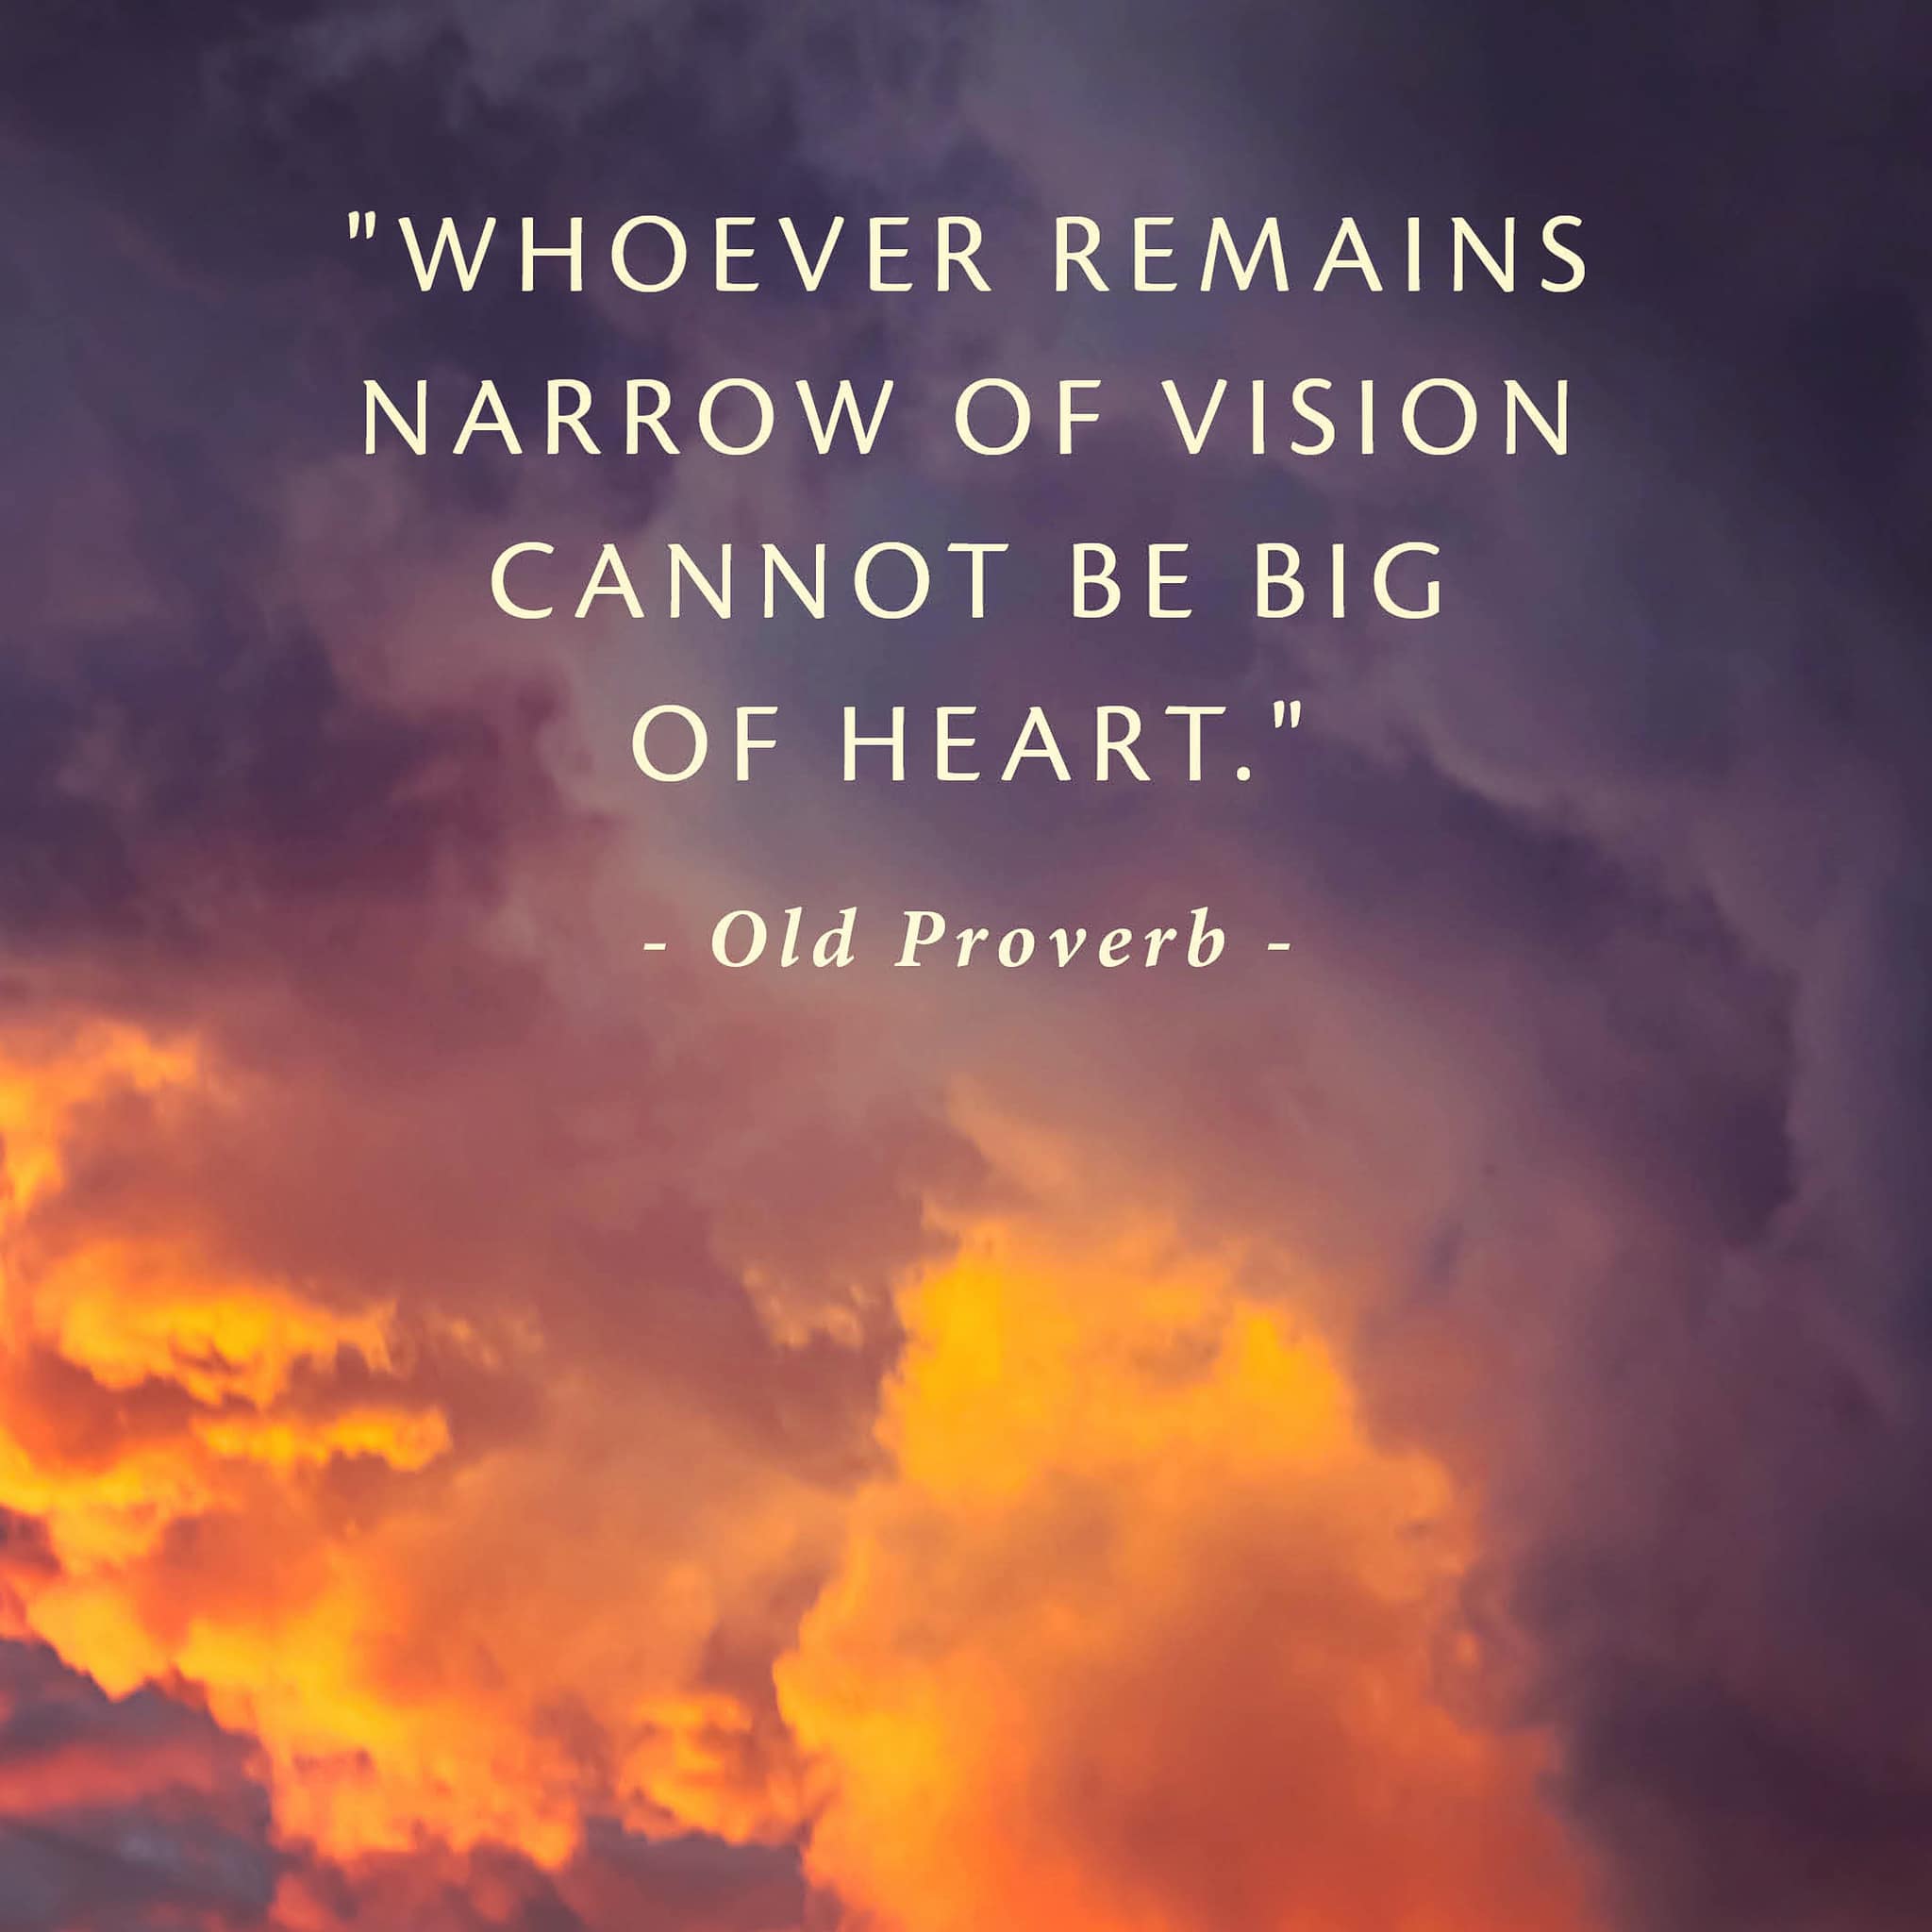 He who is narrow of vision cannot be big of heart.